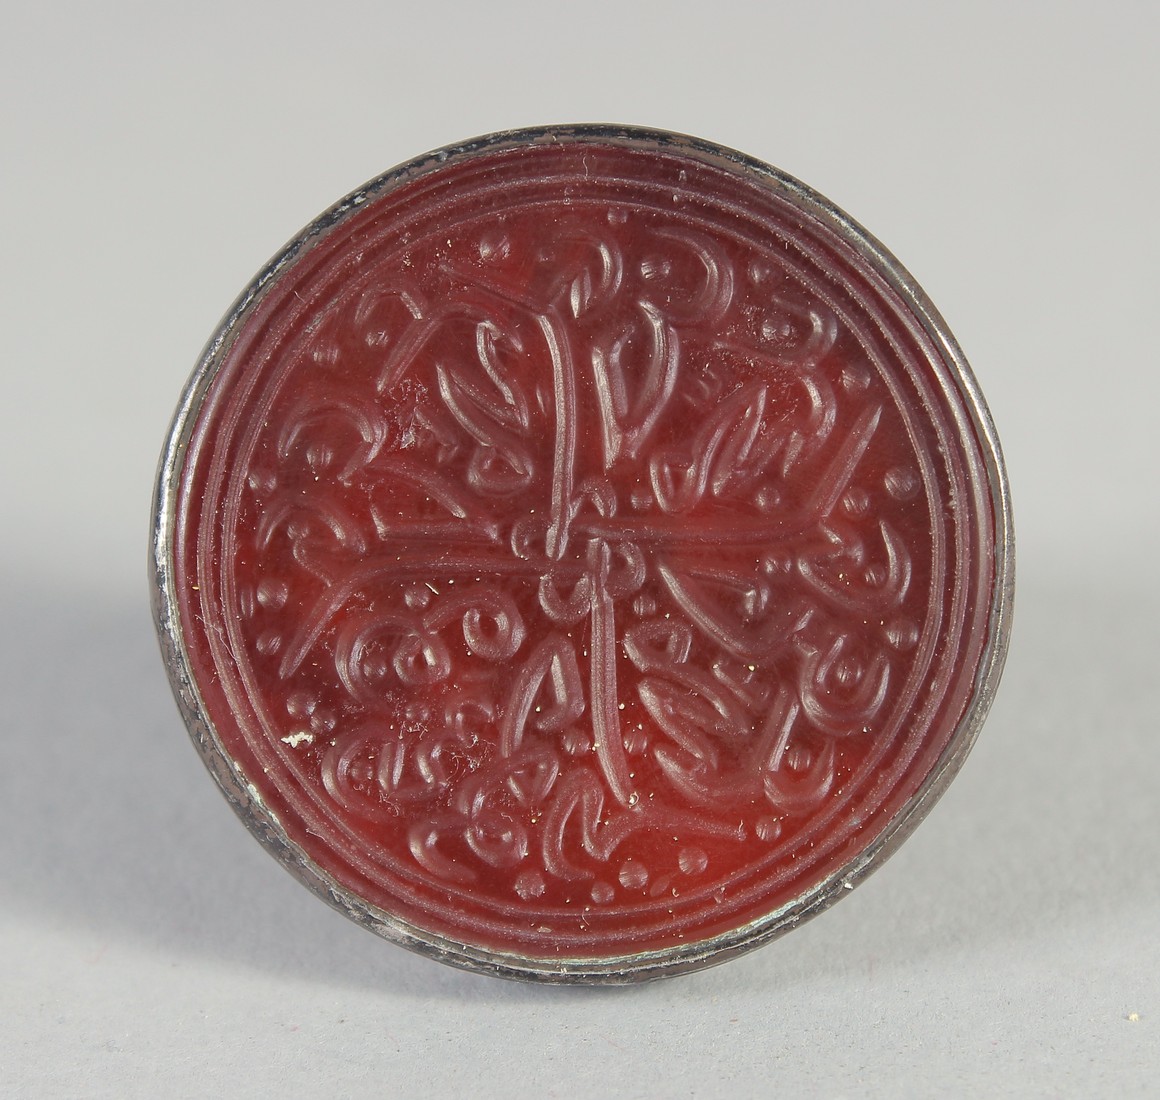 A FINE LARGE PERSIAN ENGRAVED AGATE / CARNELIAN RING. - Image 3 of 4